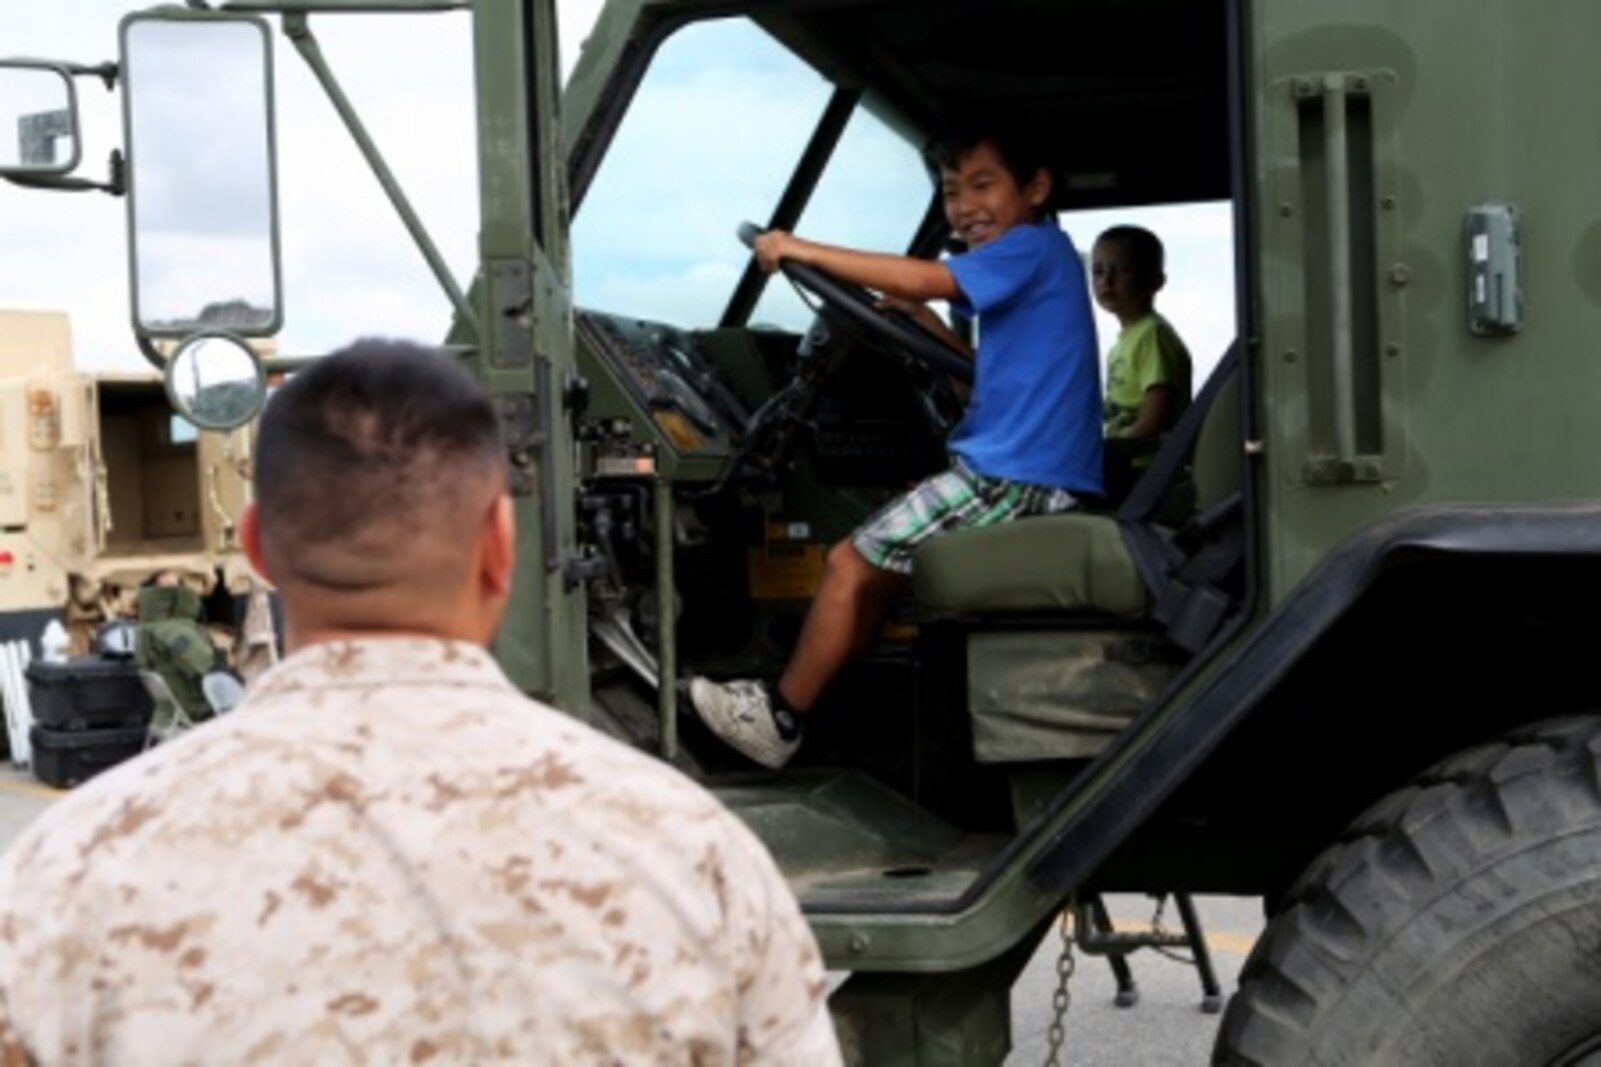 Sergeant Michael Obado, heavy equipment floor chief, 7th Engineer Support Battalion, 1st Marine Logistics Group, watches as his little boy, Nozo, explores an armored truck at a family day celebration for Marines and Sailors of 7th ESB aboard Camp Pendleton, Calif., July 10, 2015. Included in the celebration were bouncy houses and displays that allowed them to look at things like sniper rifles, armored vehicles and Explosive Ordnance Disposal gear.
